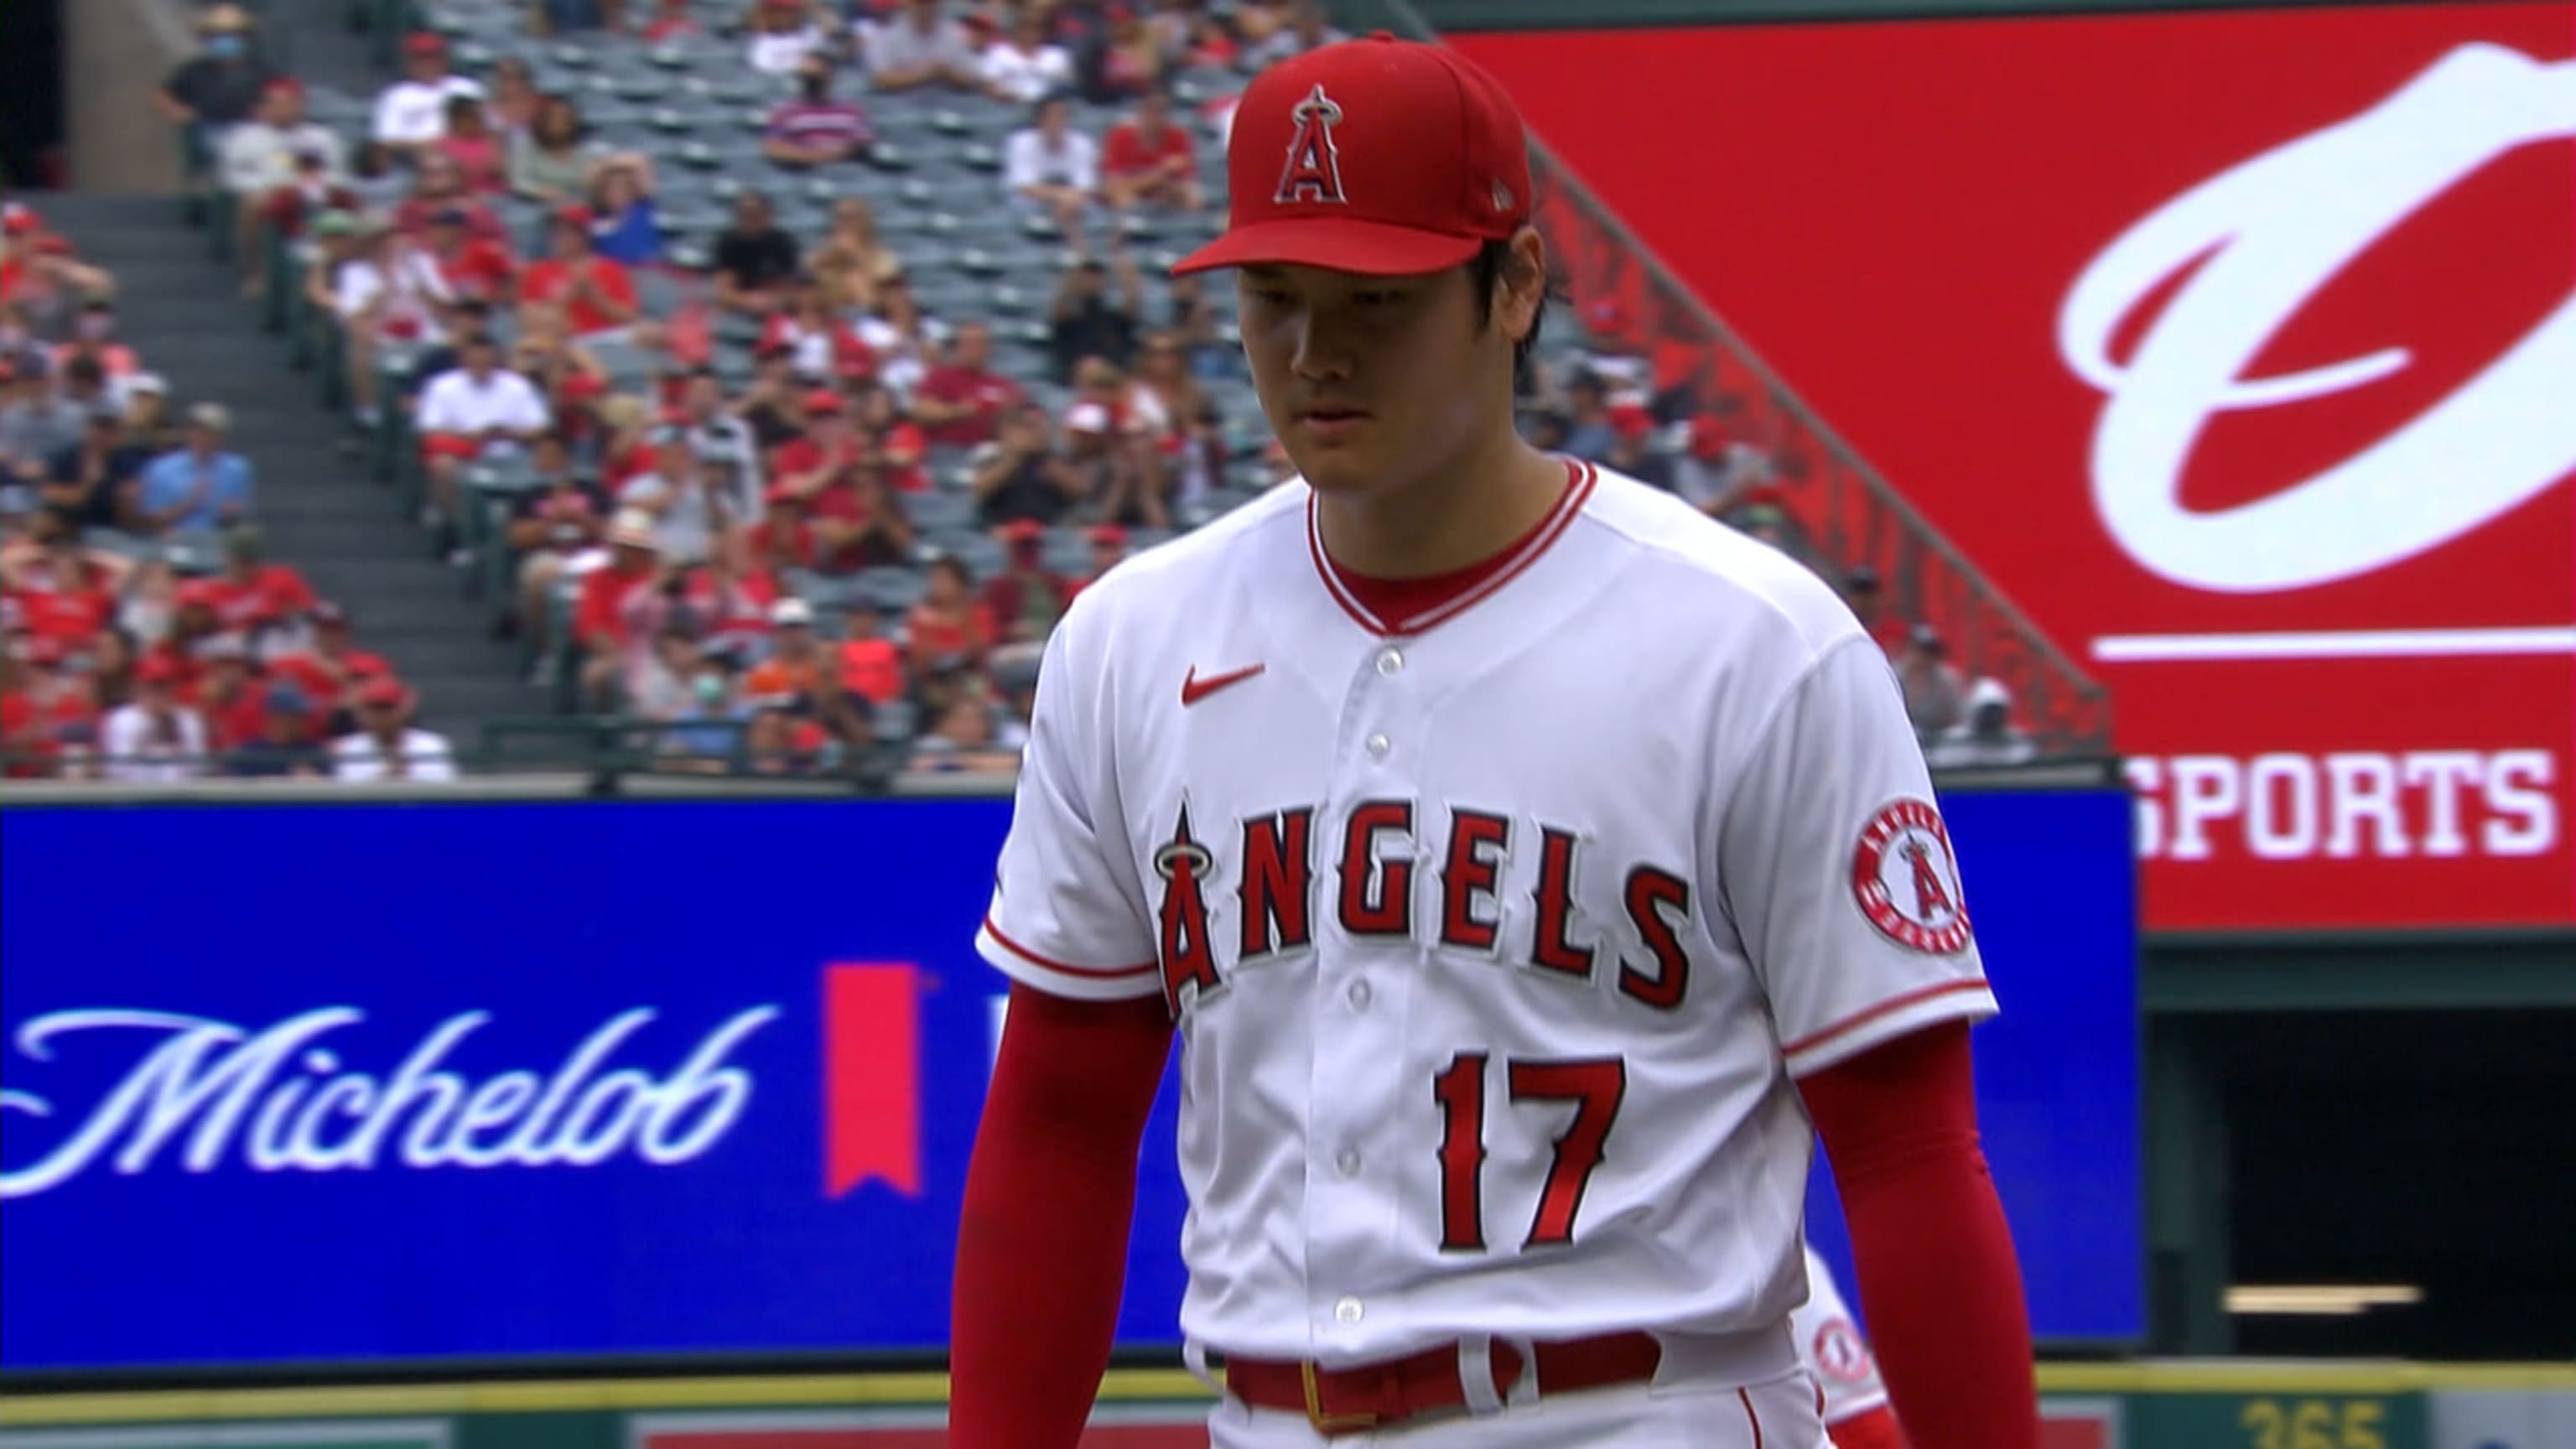 Shohei Ohtani had the highest selling jersey in MLB this season 👀📈 